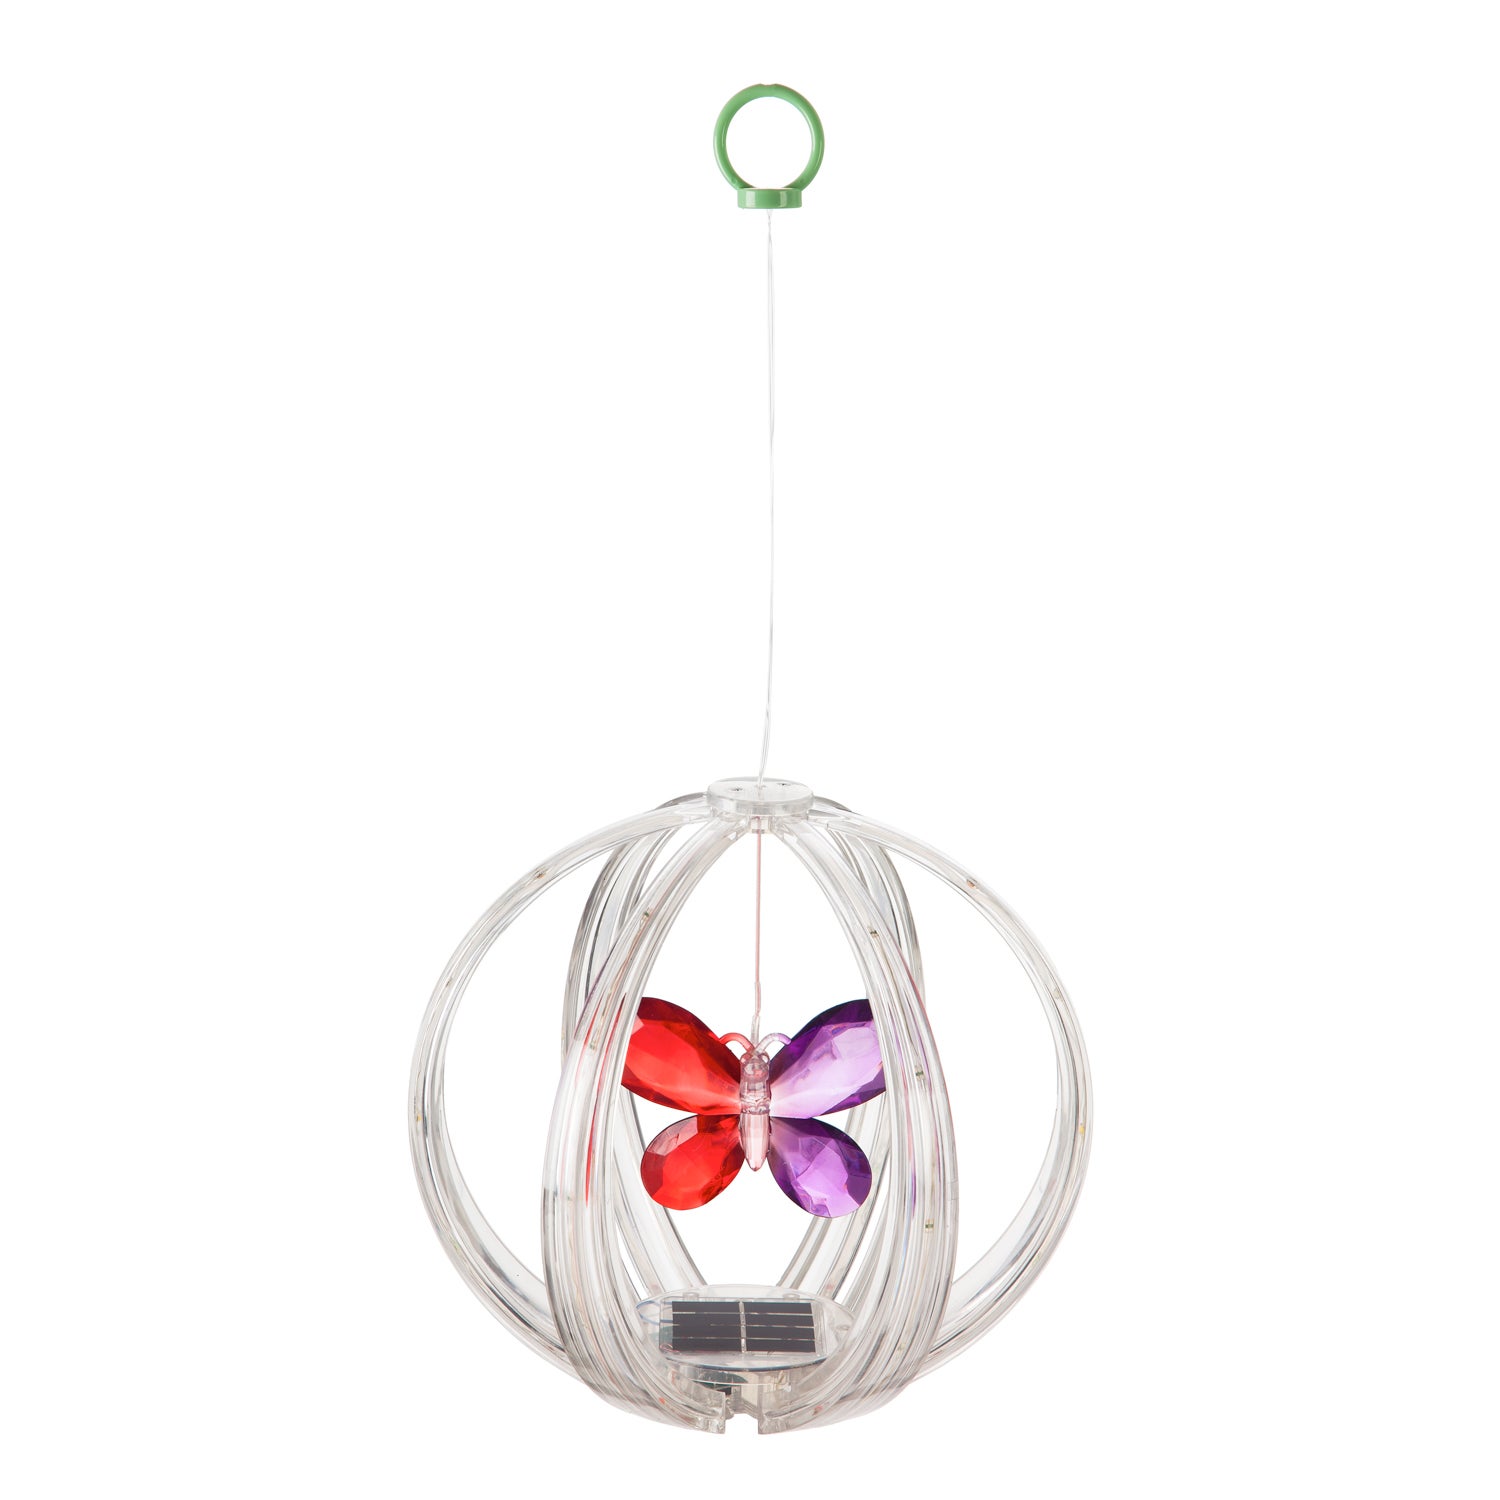 Butterfly Solar Mobile Sphere with Multicolor Chasing Light Display